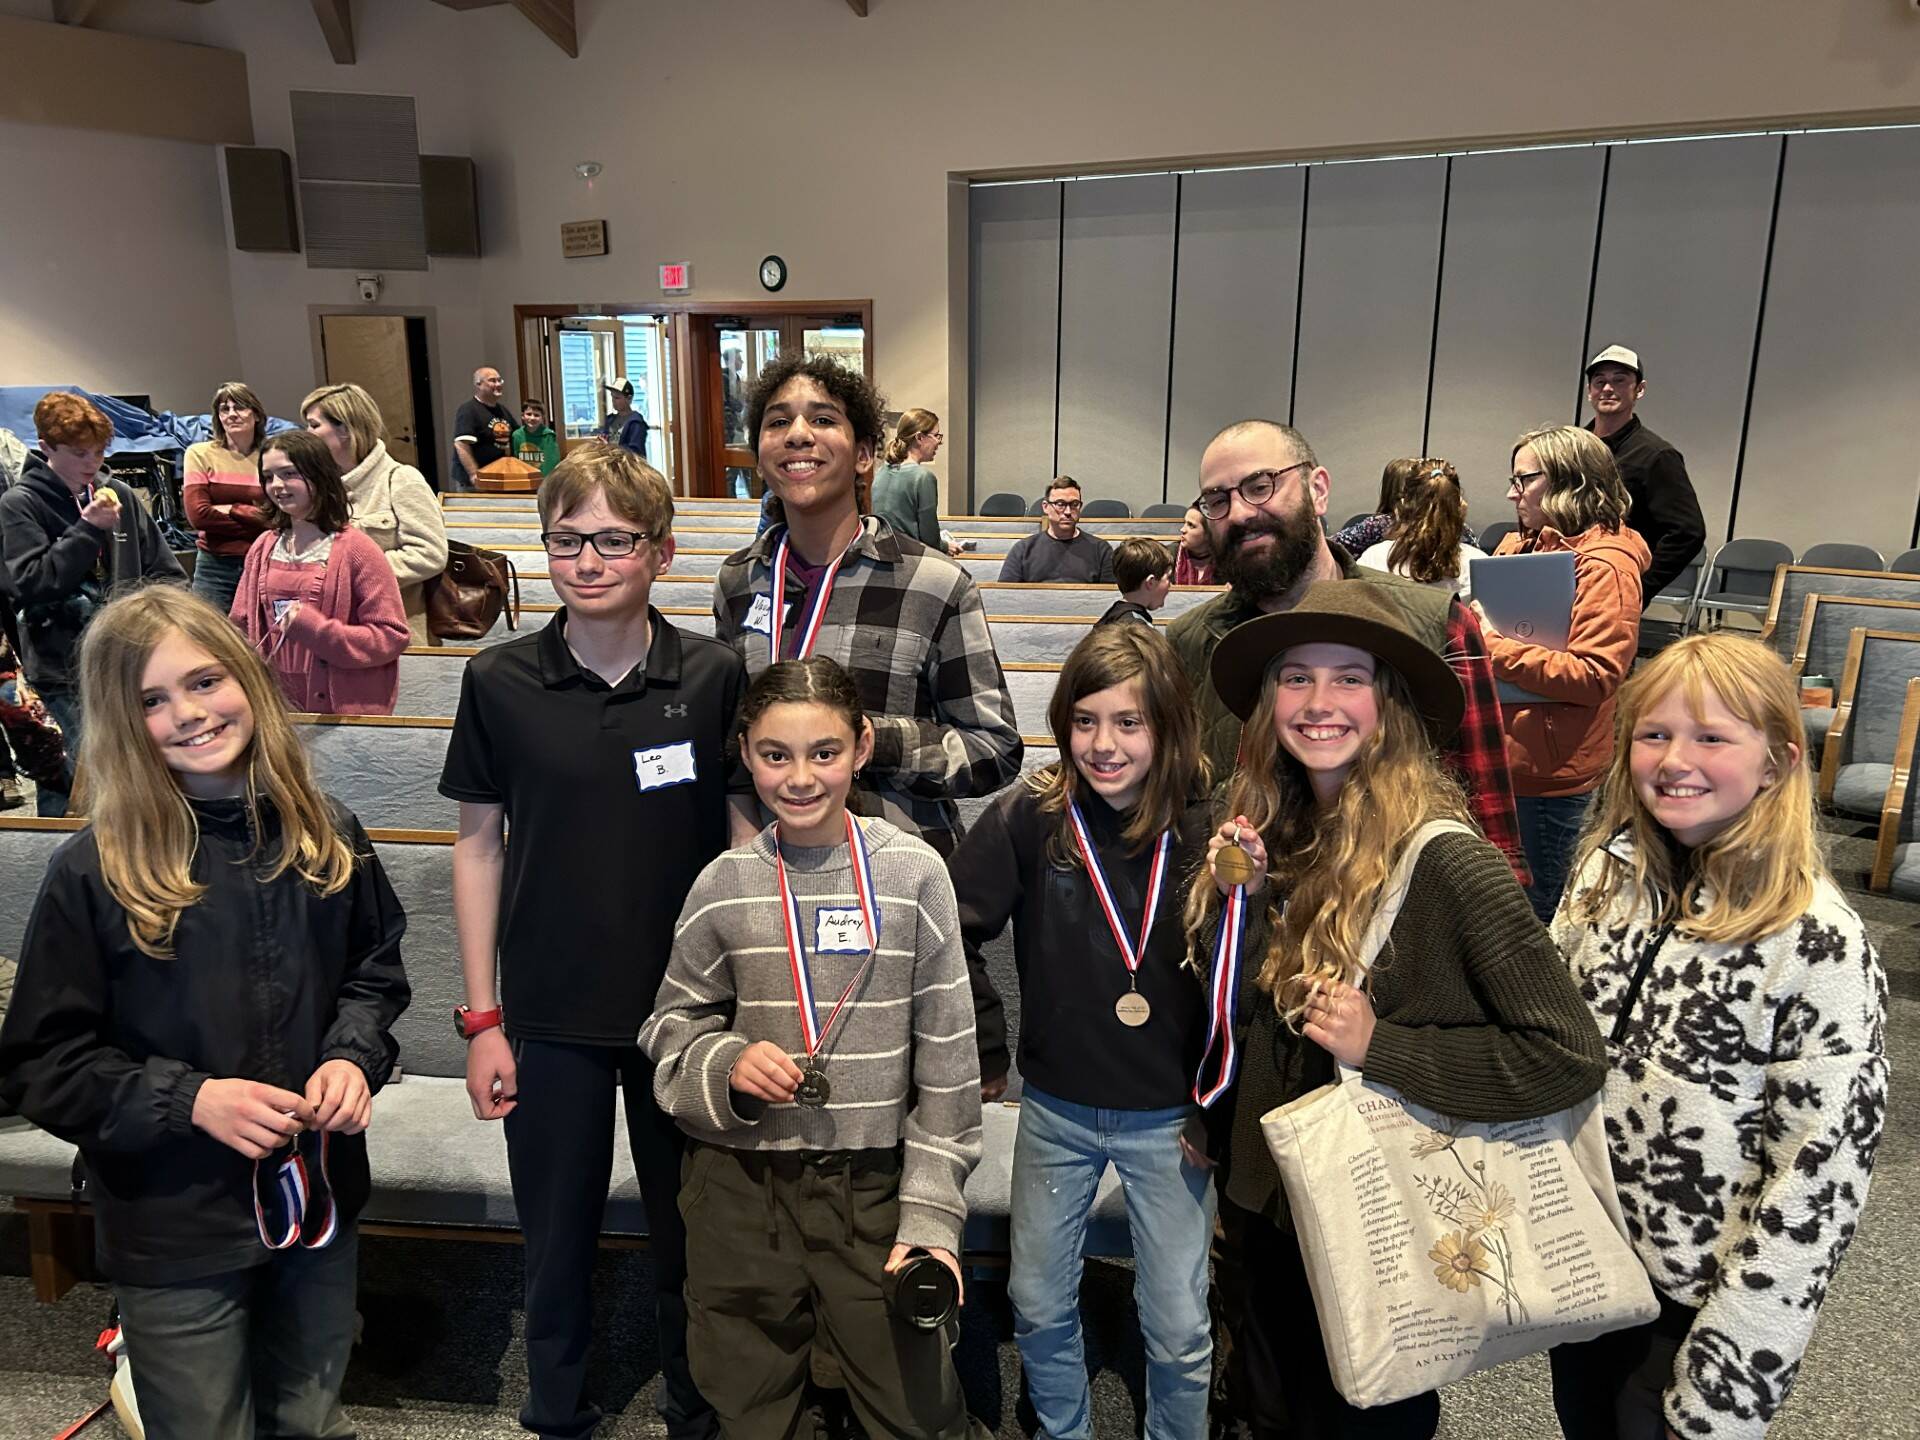 Contributed photo by Paul Mayer
Orcas Island Students. Far left: Miles Battles; back row: Leo Battles, Vaughn Webster, coach Yotam Zohar; front row: Audrey Eberle, Wolf Zohar, Marin Andersson and Sidney Andersson,